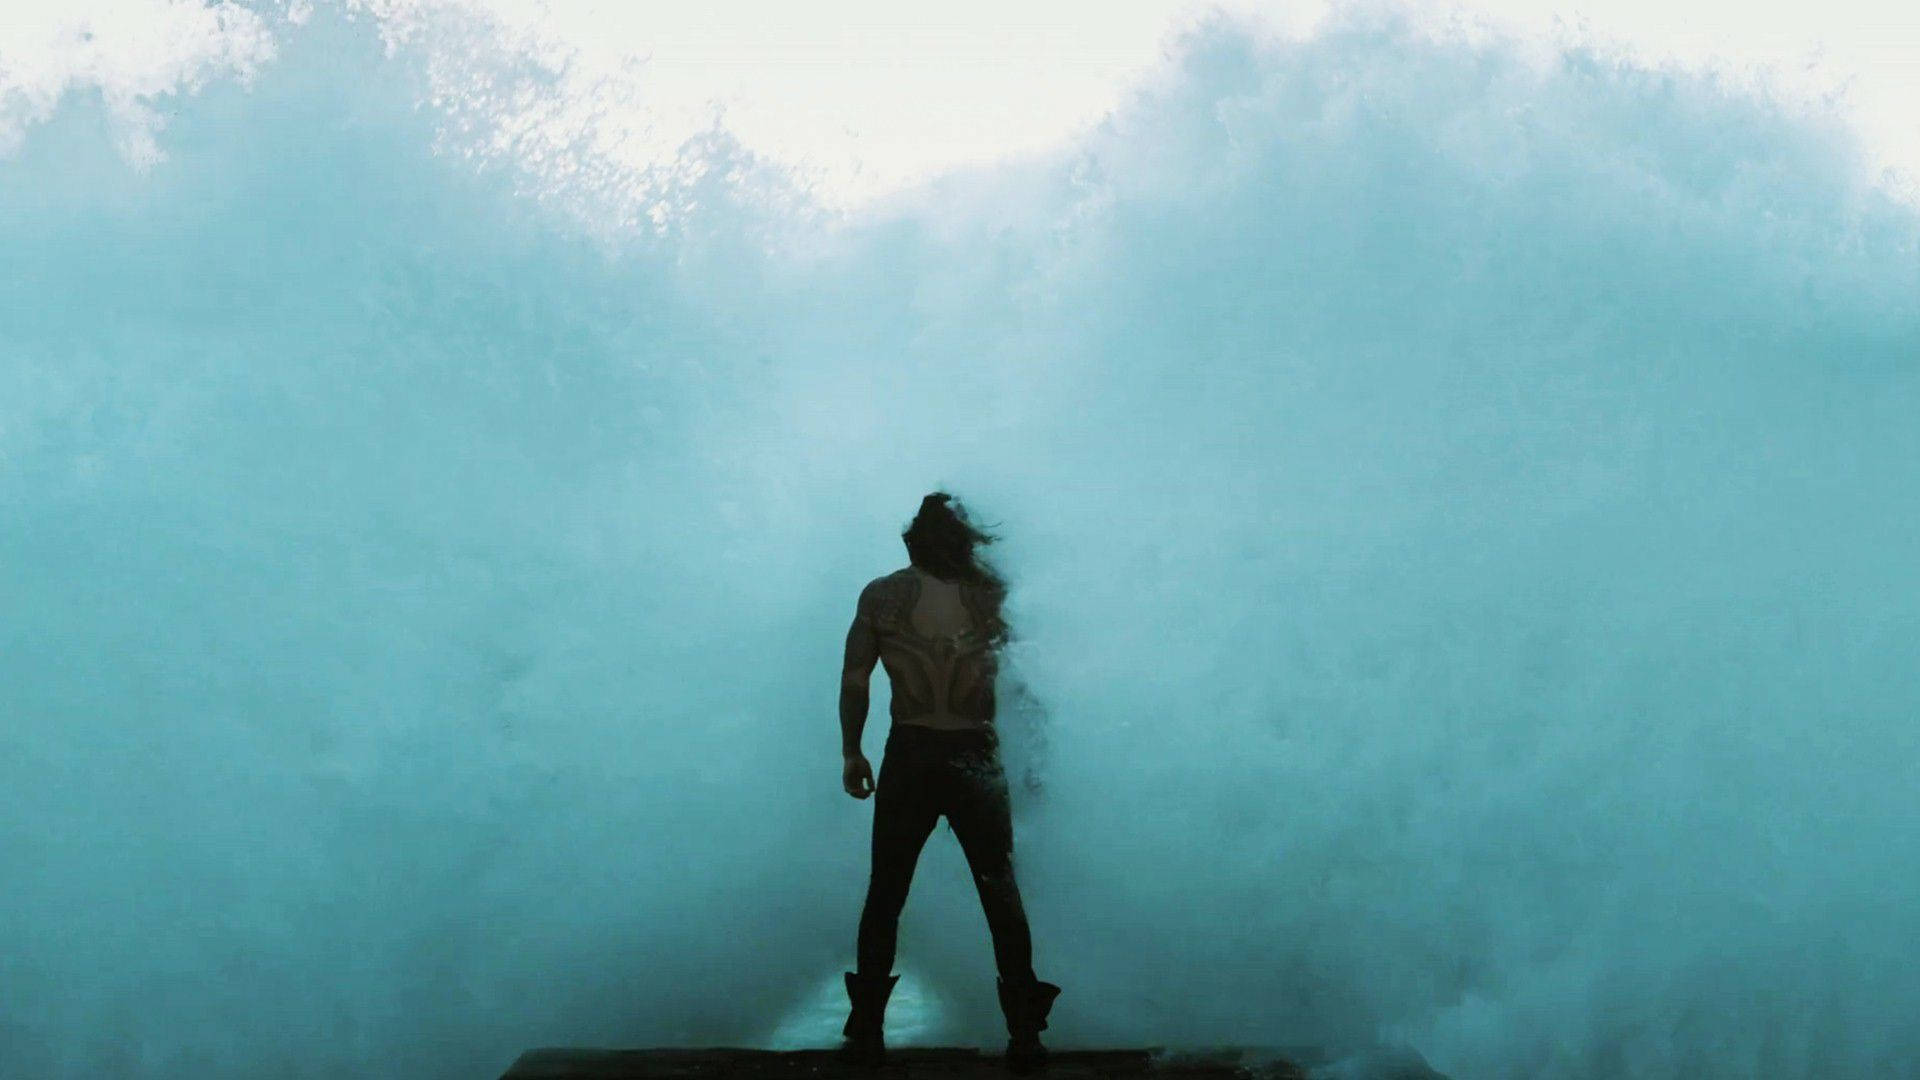 Arthur Curry stands tall against the raging ocean. Wallpaper